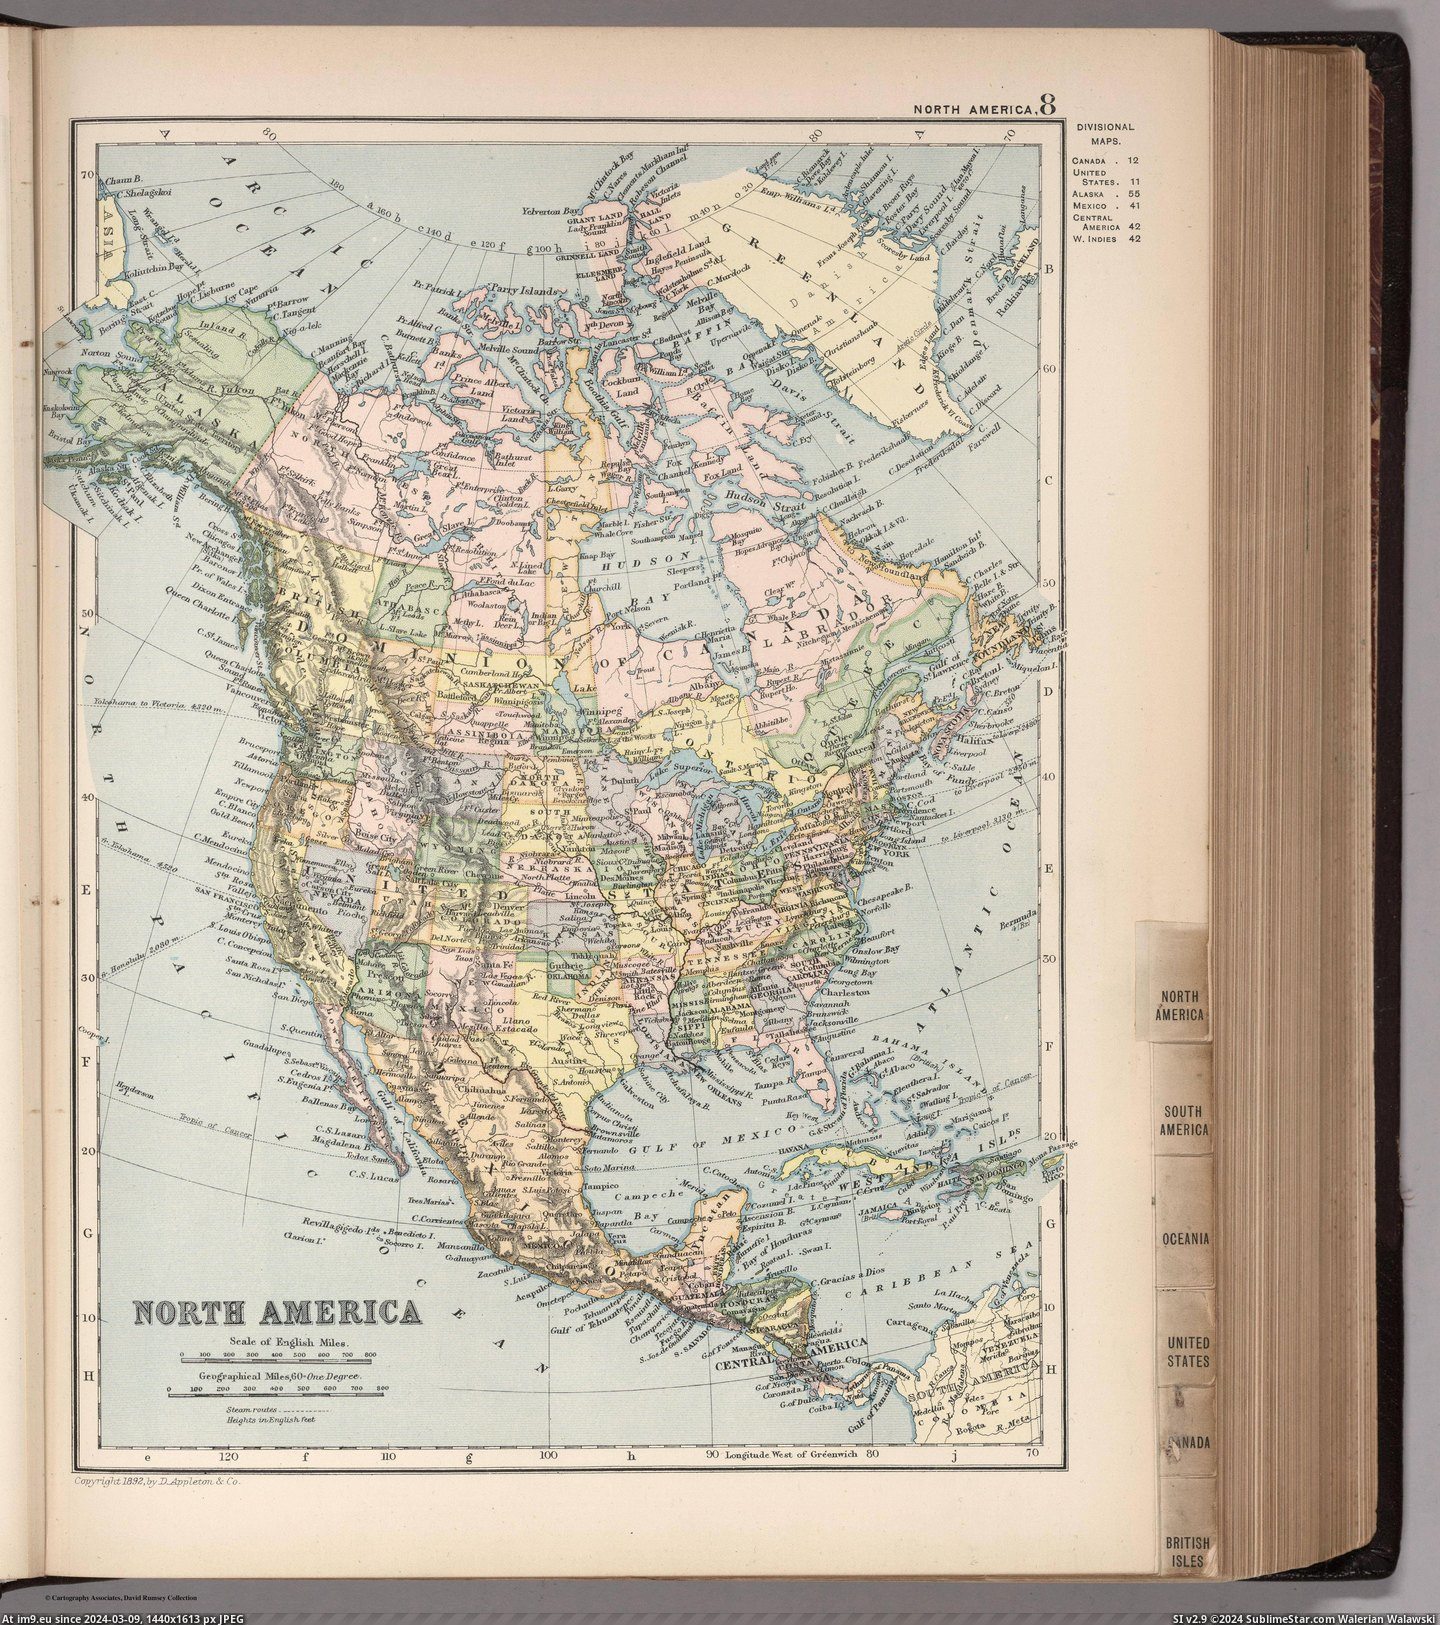 #North #Appleton #America [Mapporn] North America in 1892, made by D. Appleton & Co. [4270x4795] Pic. (Изображение из альбом My r/MAPS favs))